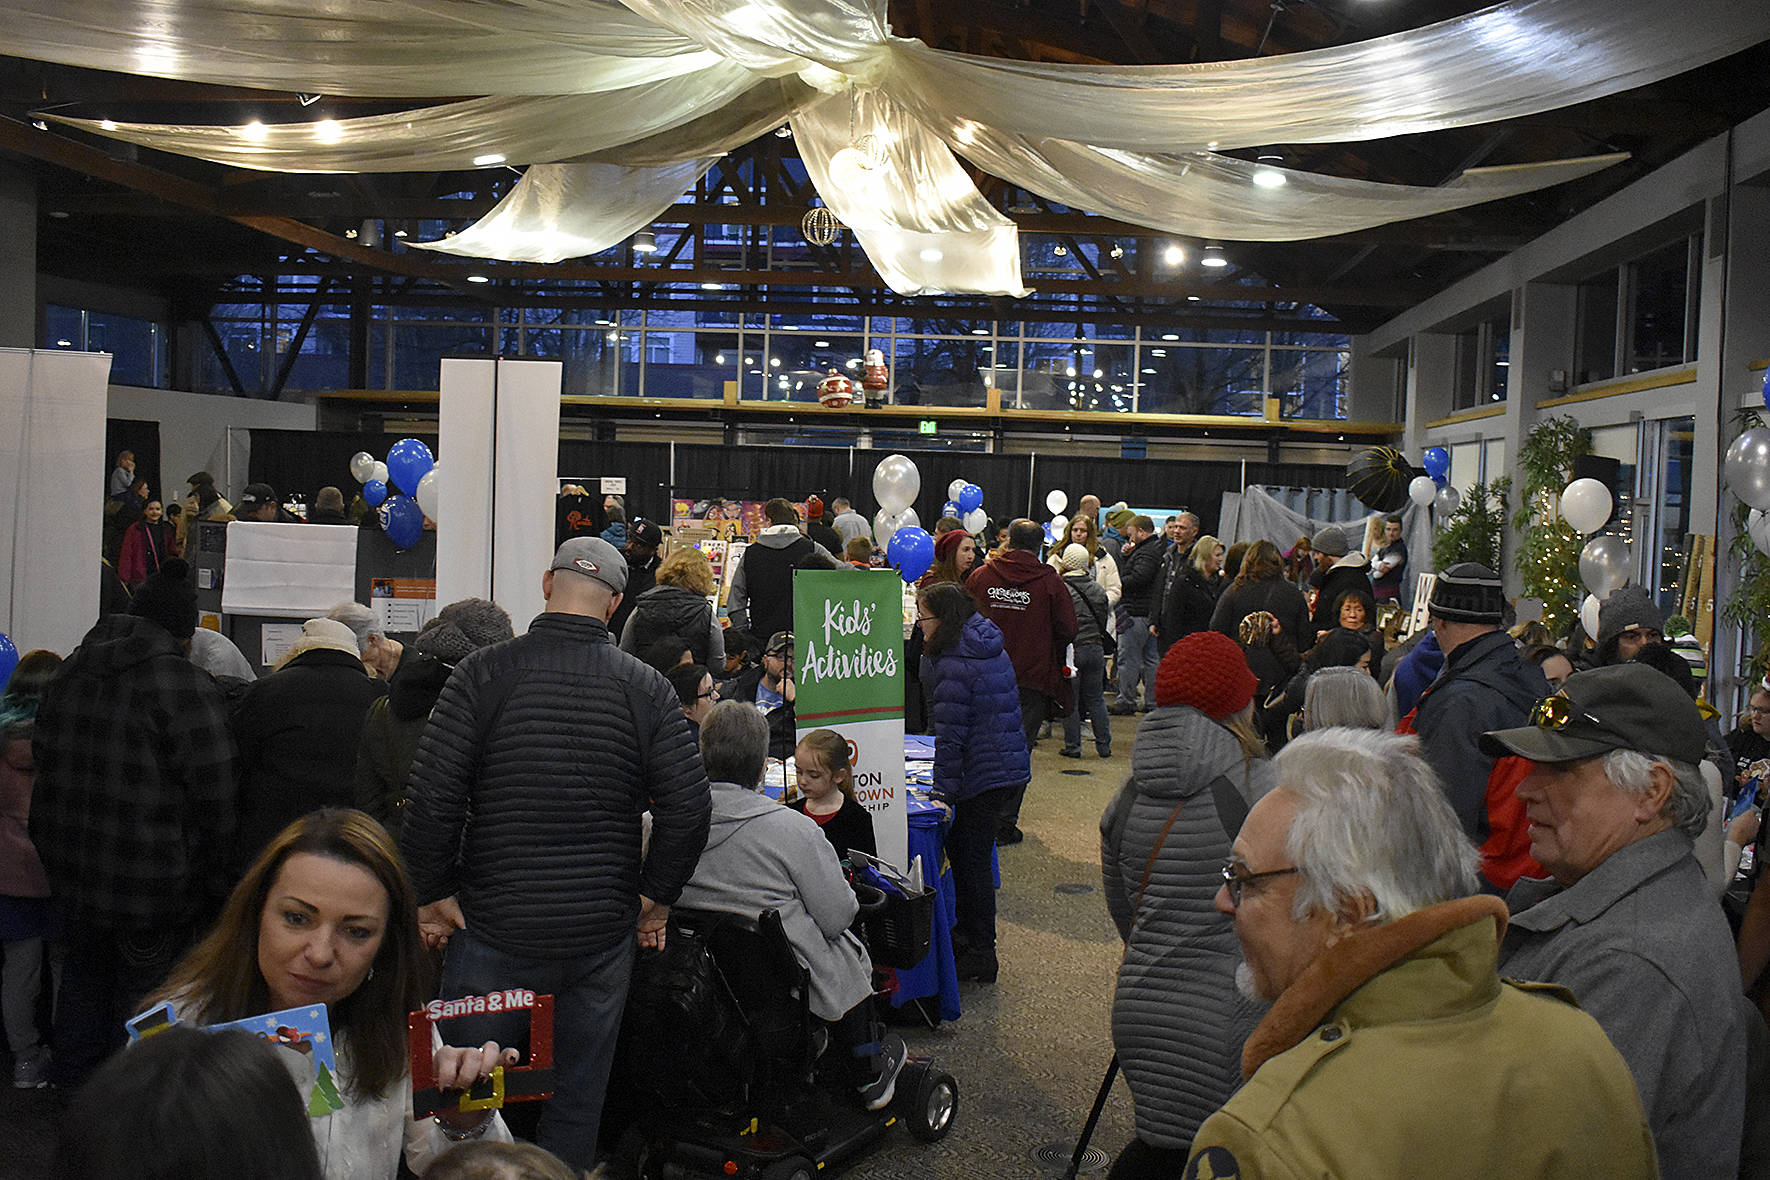 Photo by Haley Ausbun. A crowded pop-up market at the downtown tree lighting. Saturday, Nov. 30 at the Renton Pavilion Events Center.